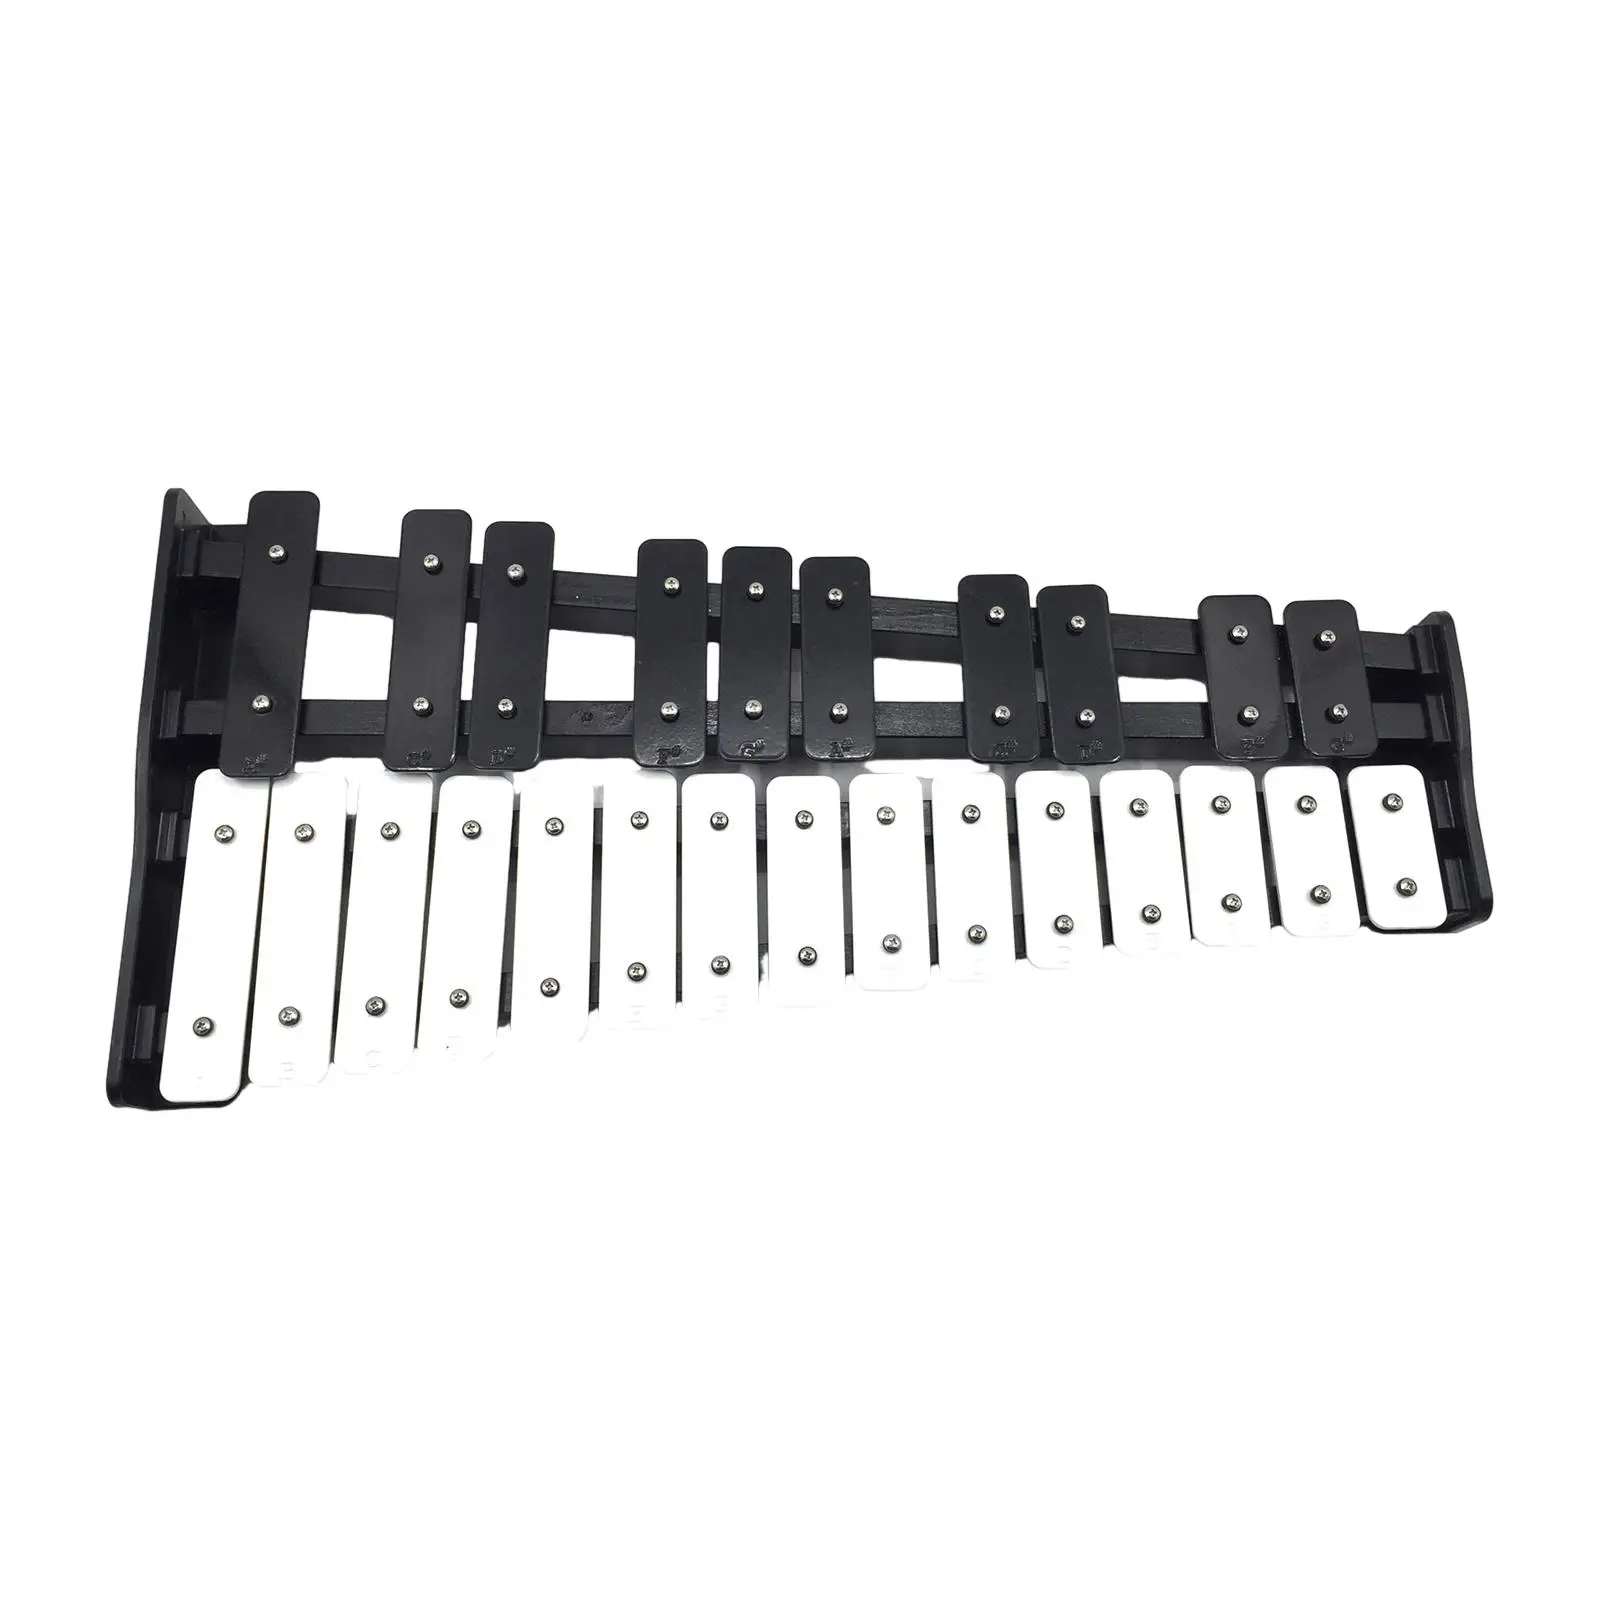 Xylophone for Beginners Compact Gifts Professional 25 Key Glockenspiel